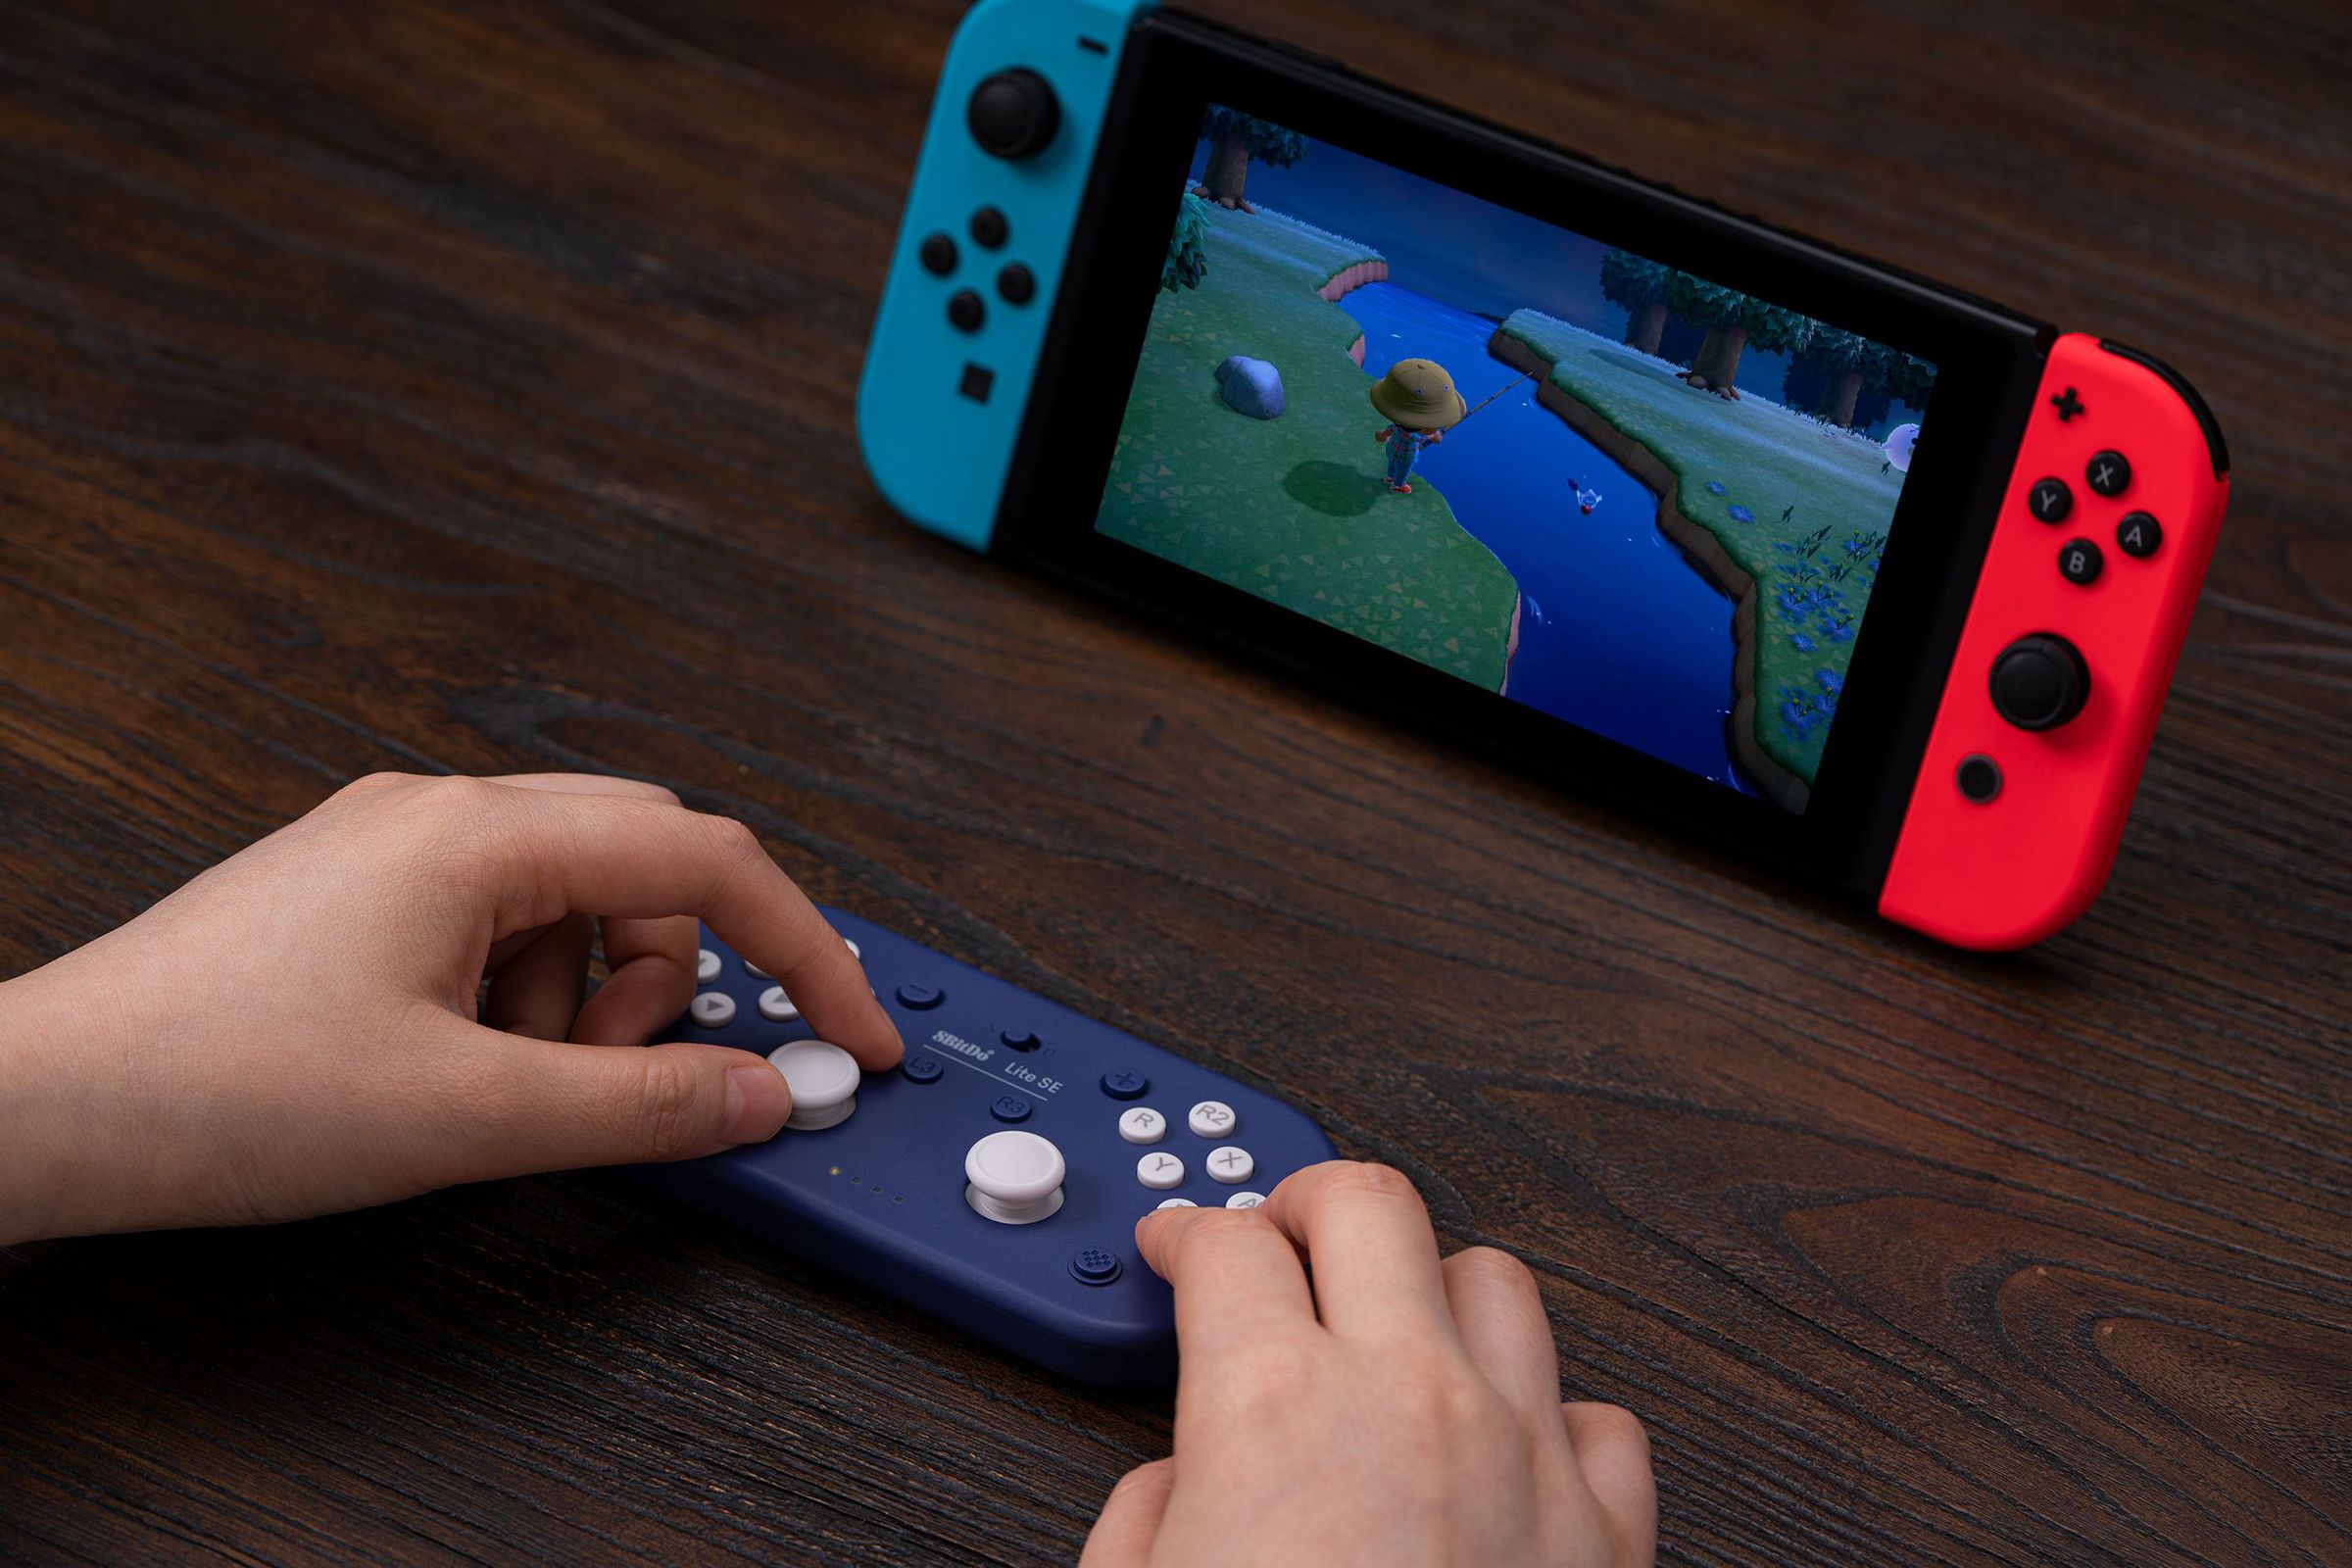 The 8BitDo controller being used on a tabletop. The player’s hands are visible, with the left controlling the left analog stick and the right on the A and B buttons. A Nintendo Switch in stand mode is in the background.